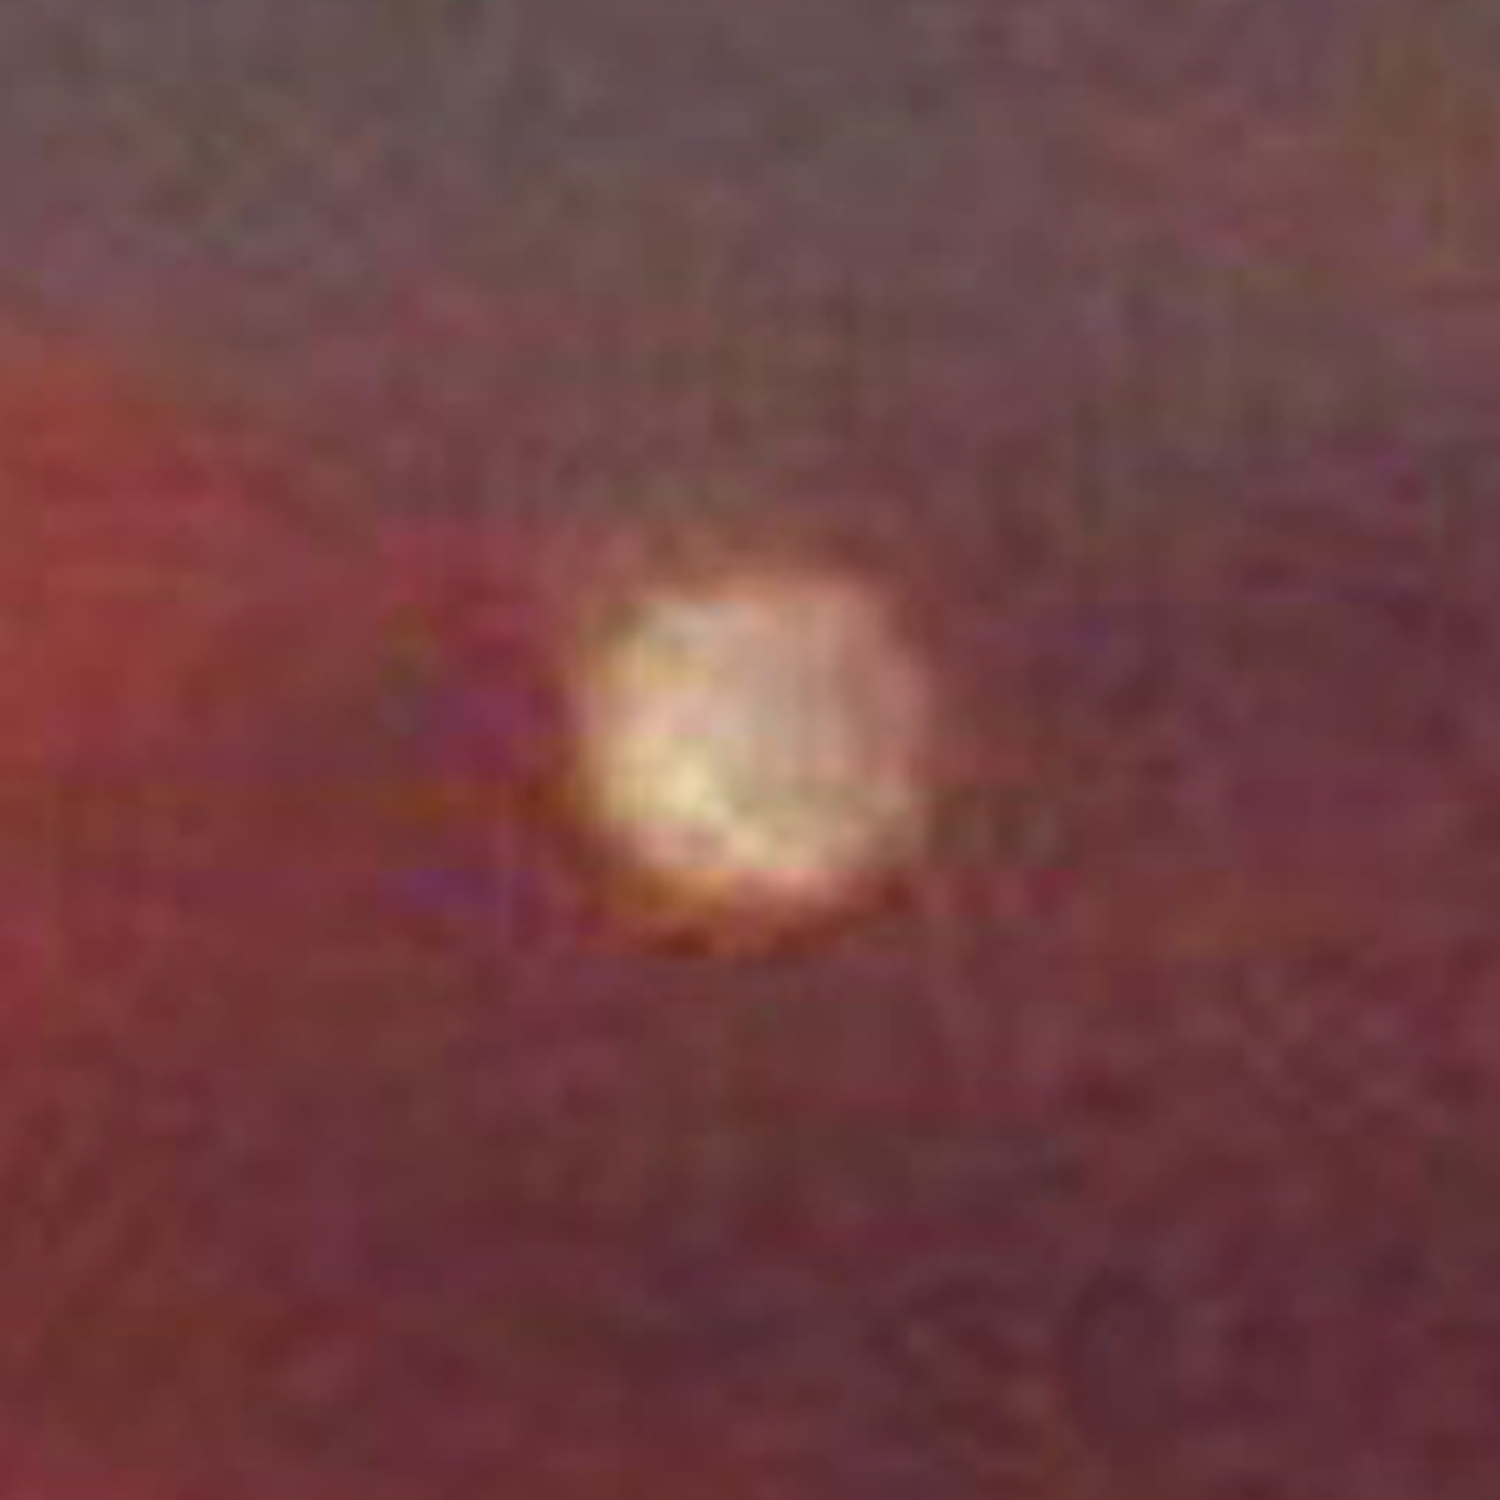 UFO picture shot on dusk at Waroona in the Peel region of Australia UFO Picture #145-5